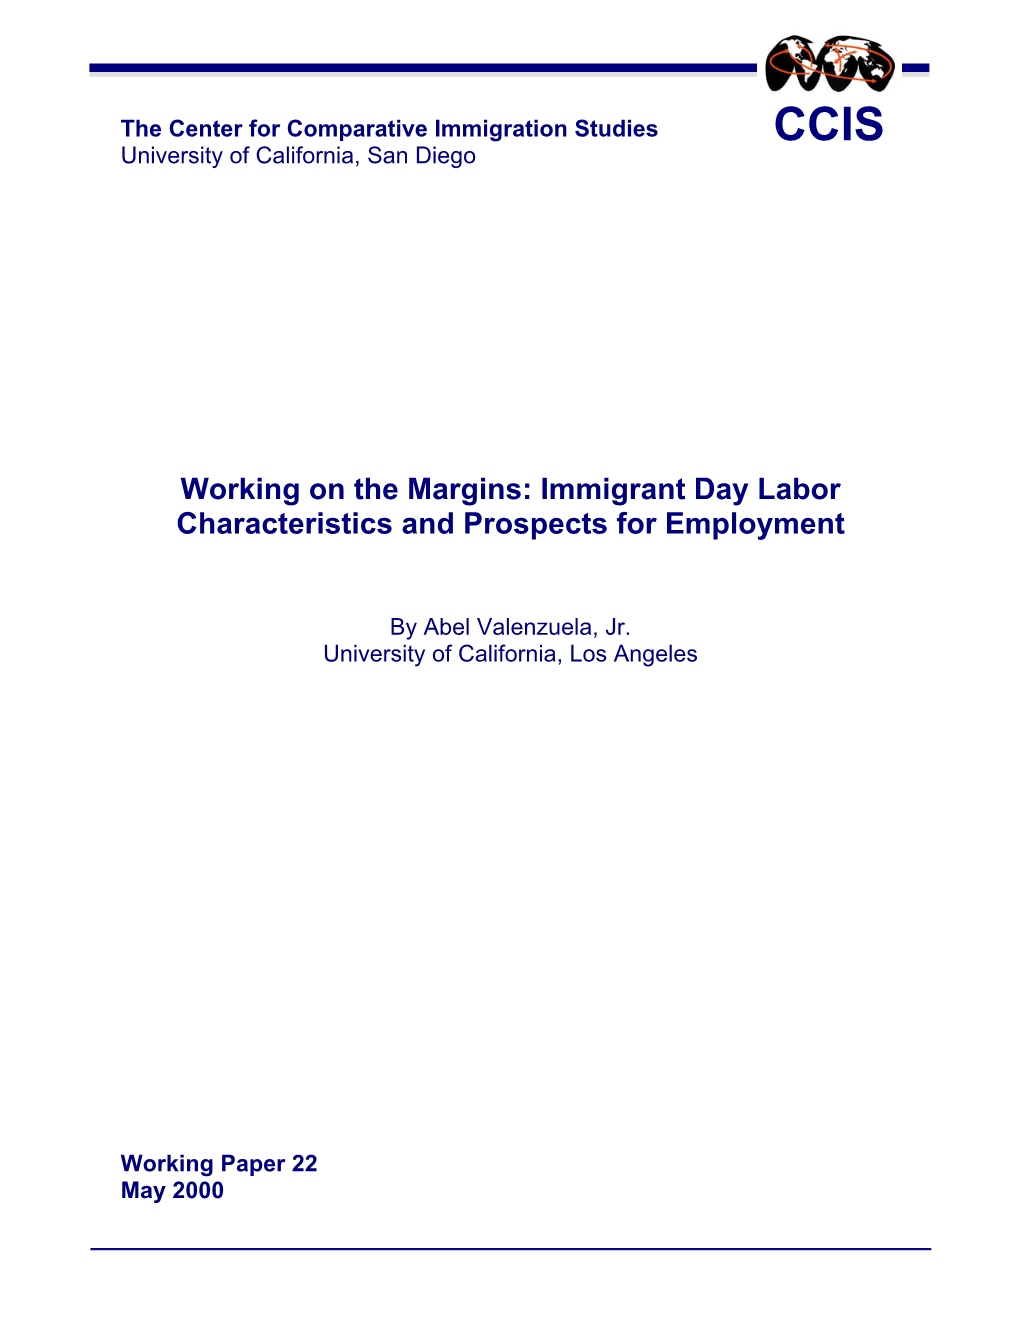 Immigrant Day Labor Characteristics and Prospects for Employment